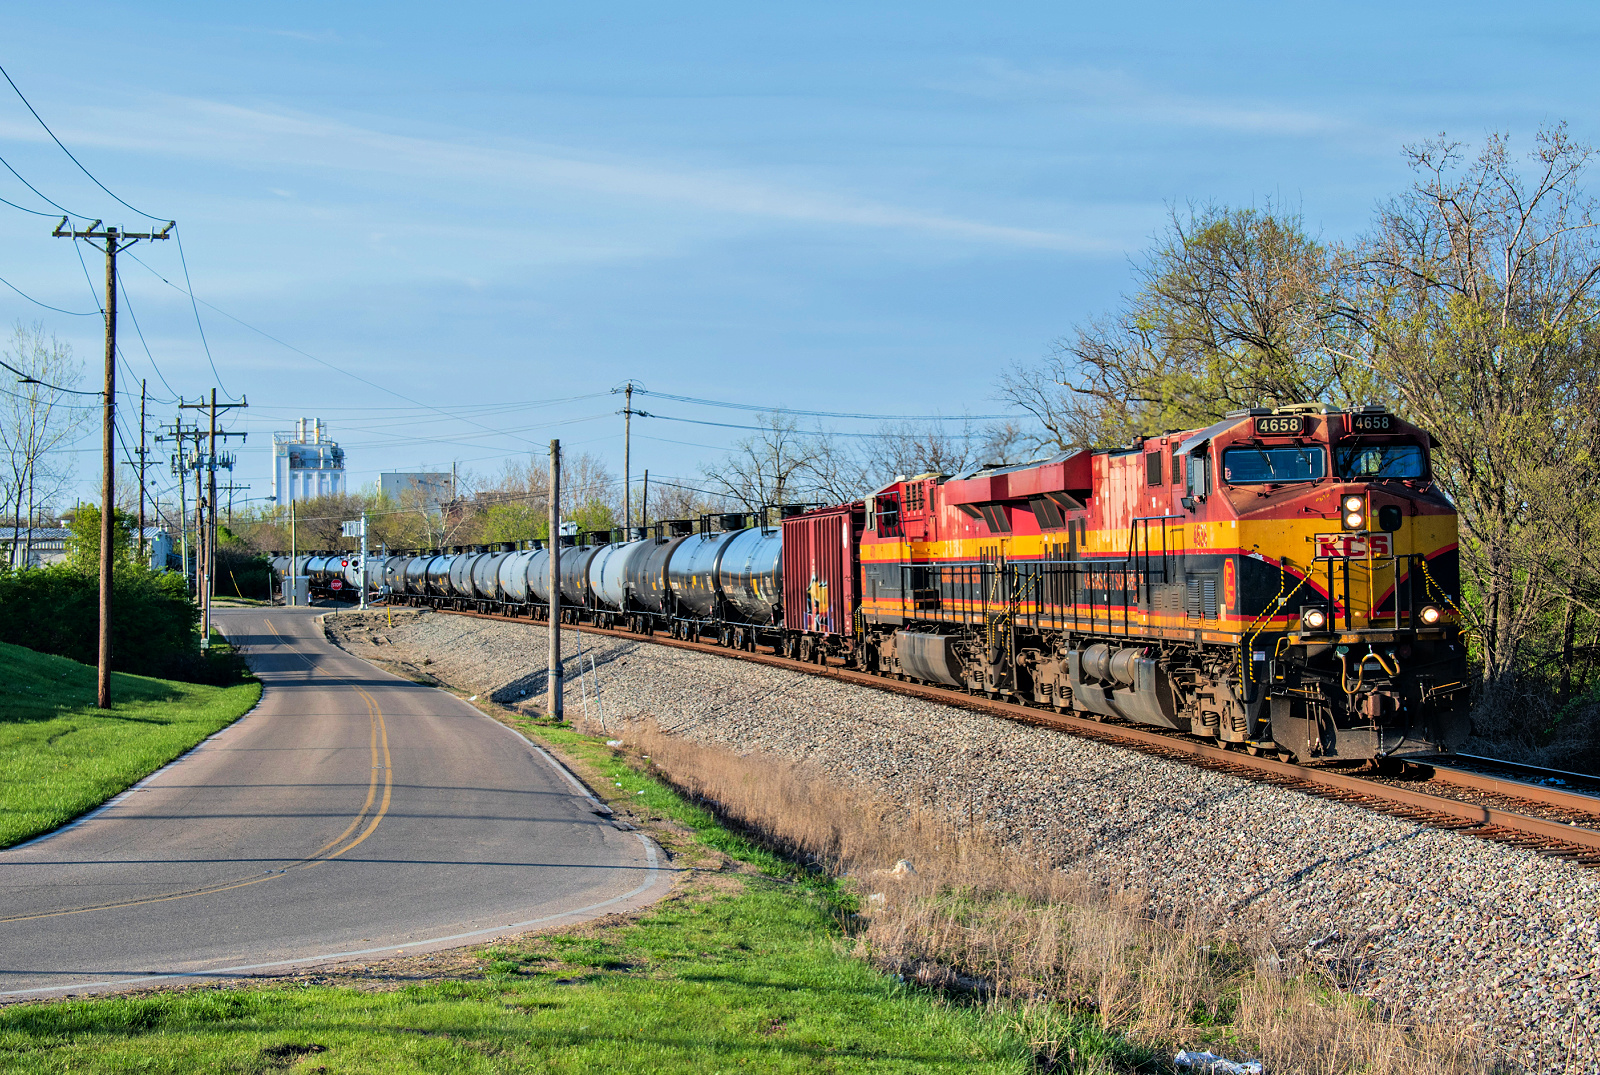 KCSM 4658 is a class GE ES44AC and  is pictured in Sharonville, OH, United States.  This was taken along the New Castle District on the Norfolk Southern. Photo Copyright: David Rohdenburg uploaded to Railroad Gallery on 04/12/2023. This photograph of KCSM 4658 was taken on Tuesday, April 11, 2023. All Rights Reserved. 